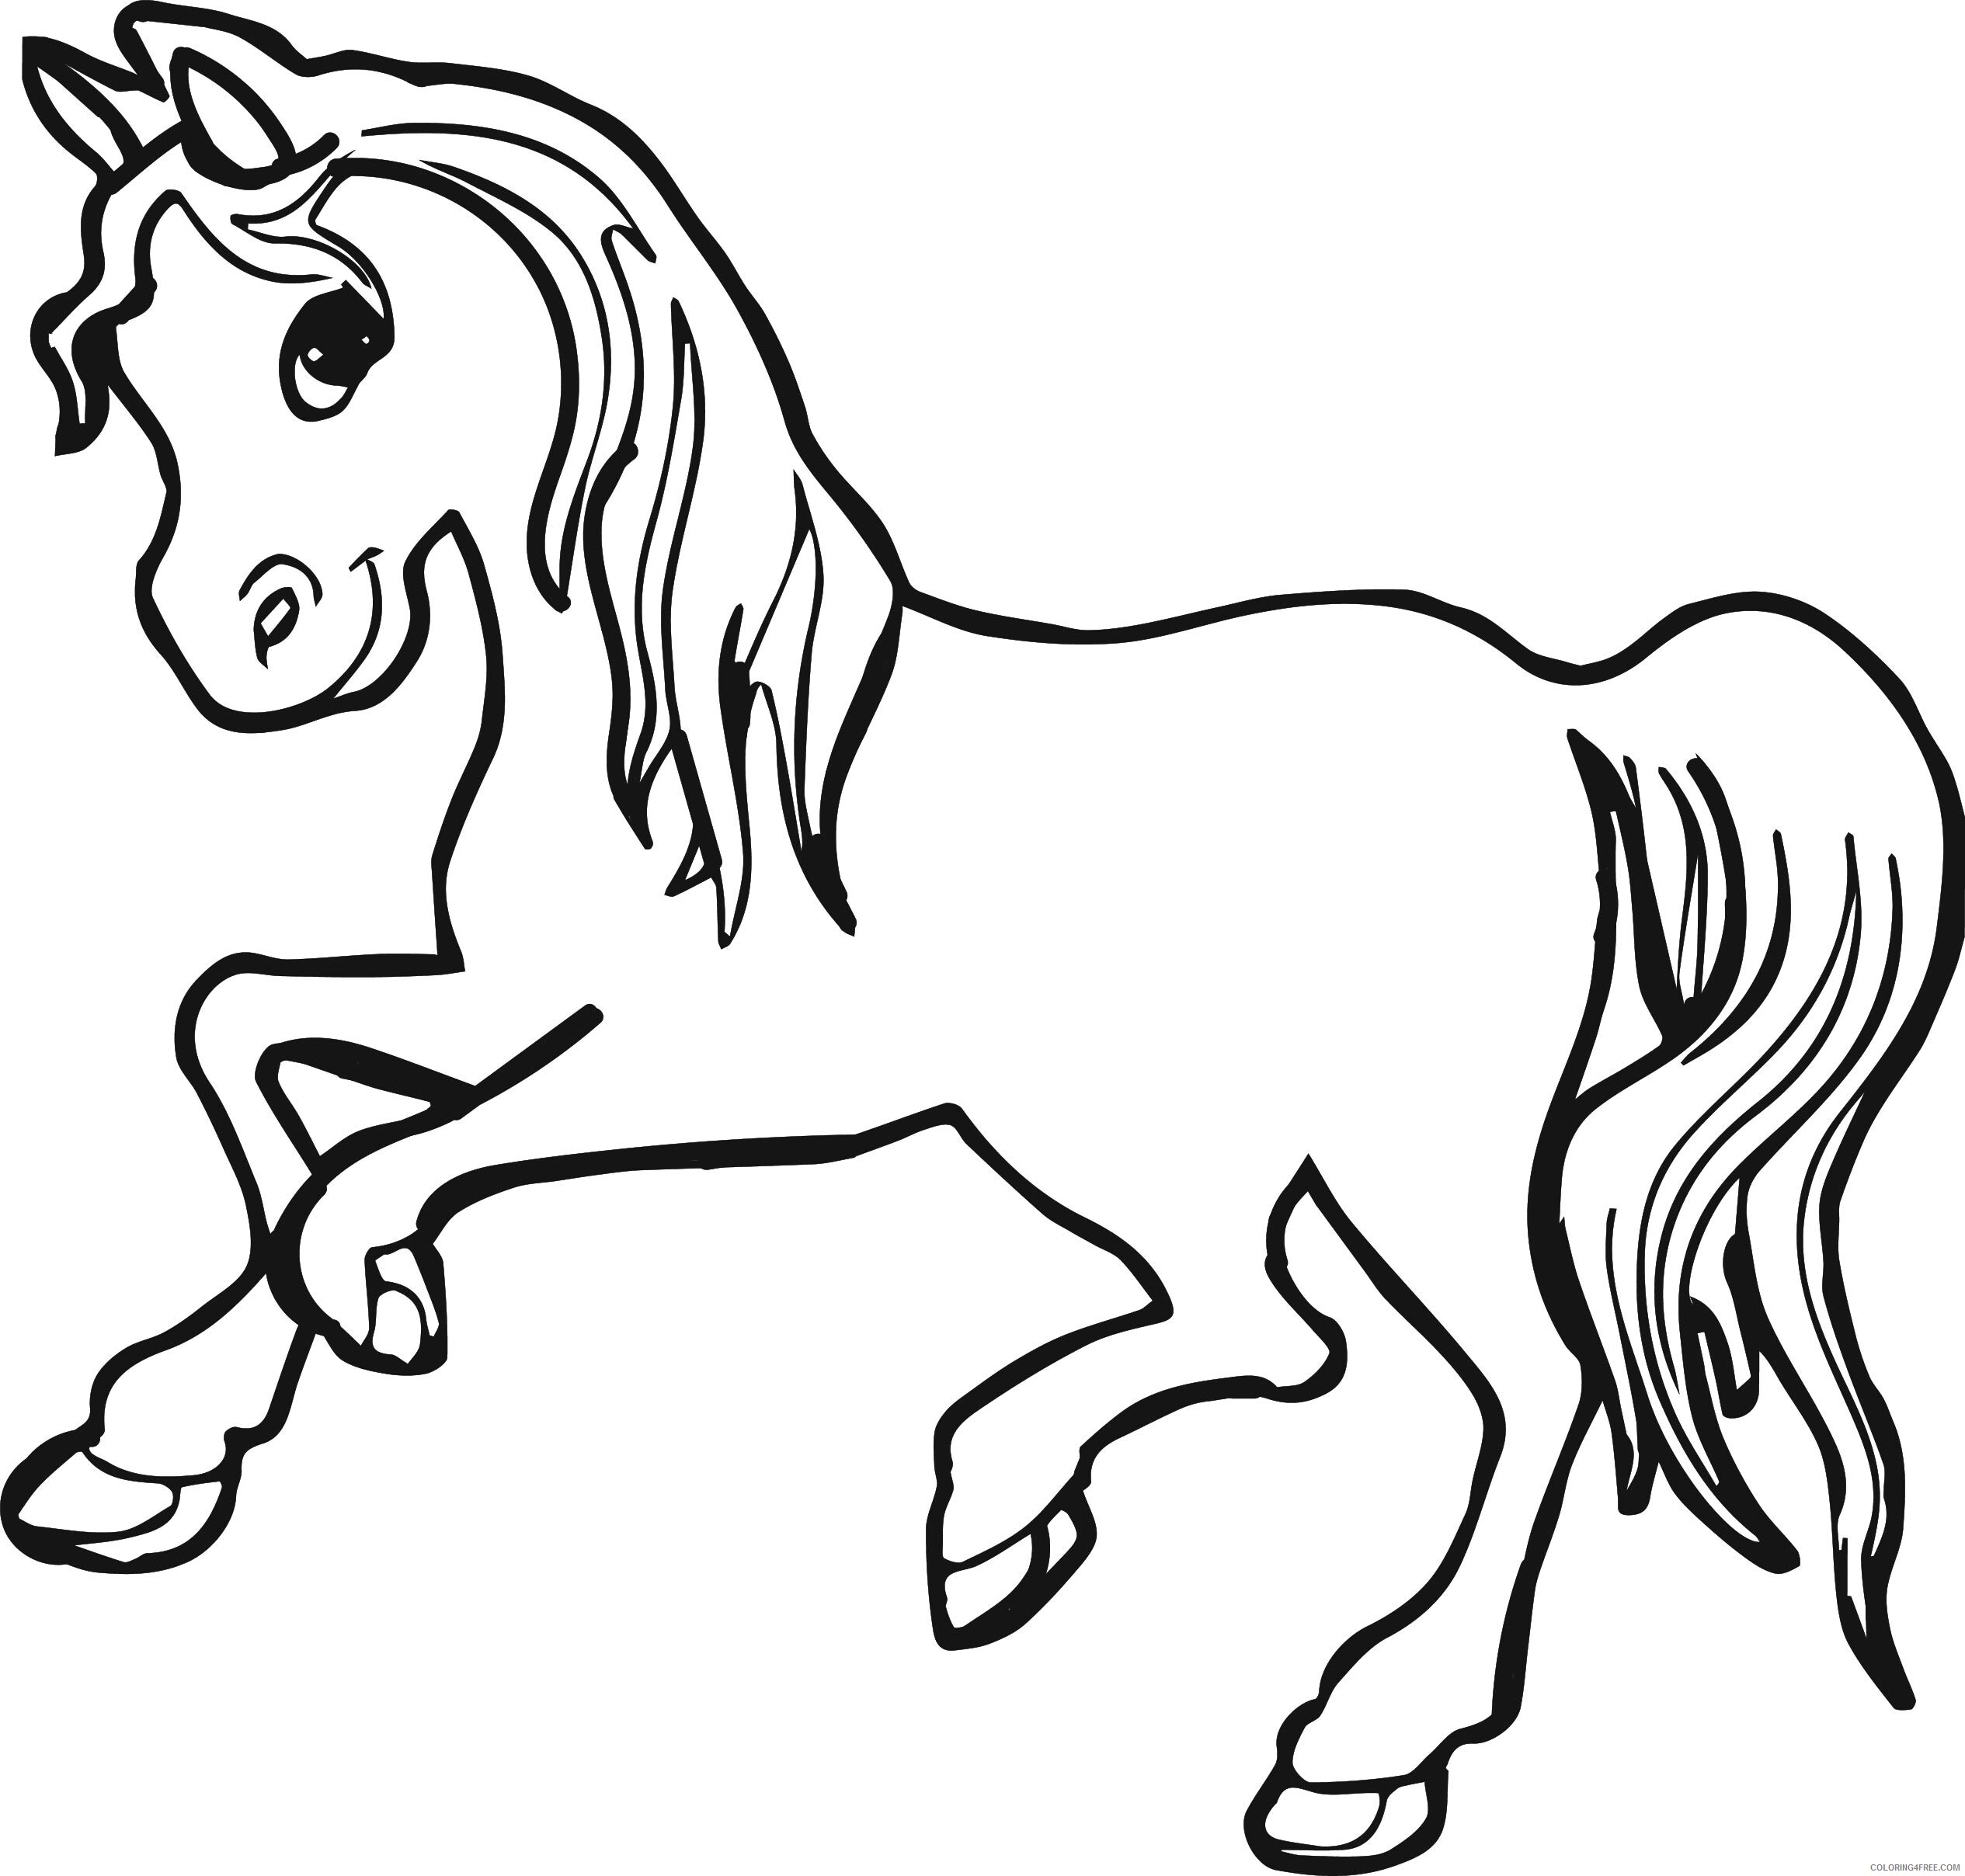 Pony Coloring Pages Animal Printable Sheets Adorable Pony 2021 3983 Coloring4free